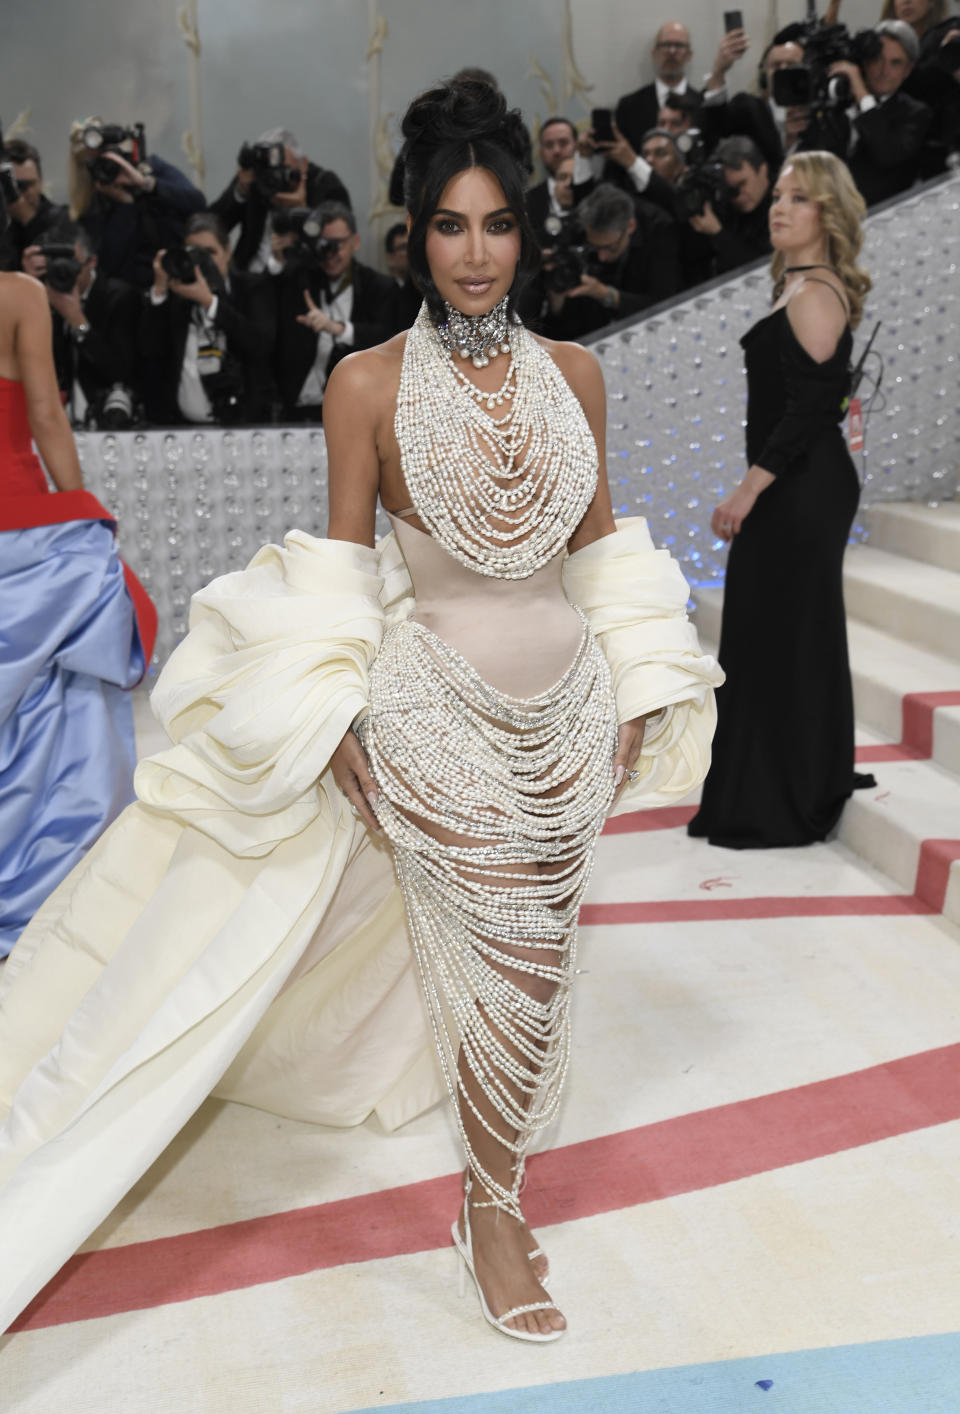 Kim Kardashian attends The Metropolitan Museum of Art's Costume Institute benefit gala celebrating the opening of the "Karl Lagerfeld: A Line of Beauty" exhibition on Monday, May 1, 2023, in New York. (Photo by Evan Agostini/Invision/AP)